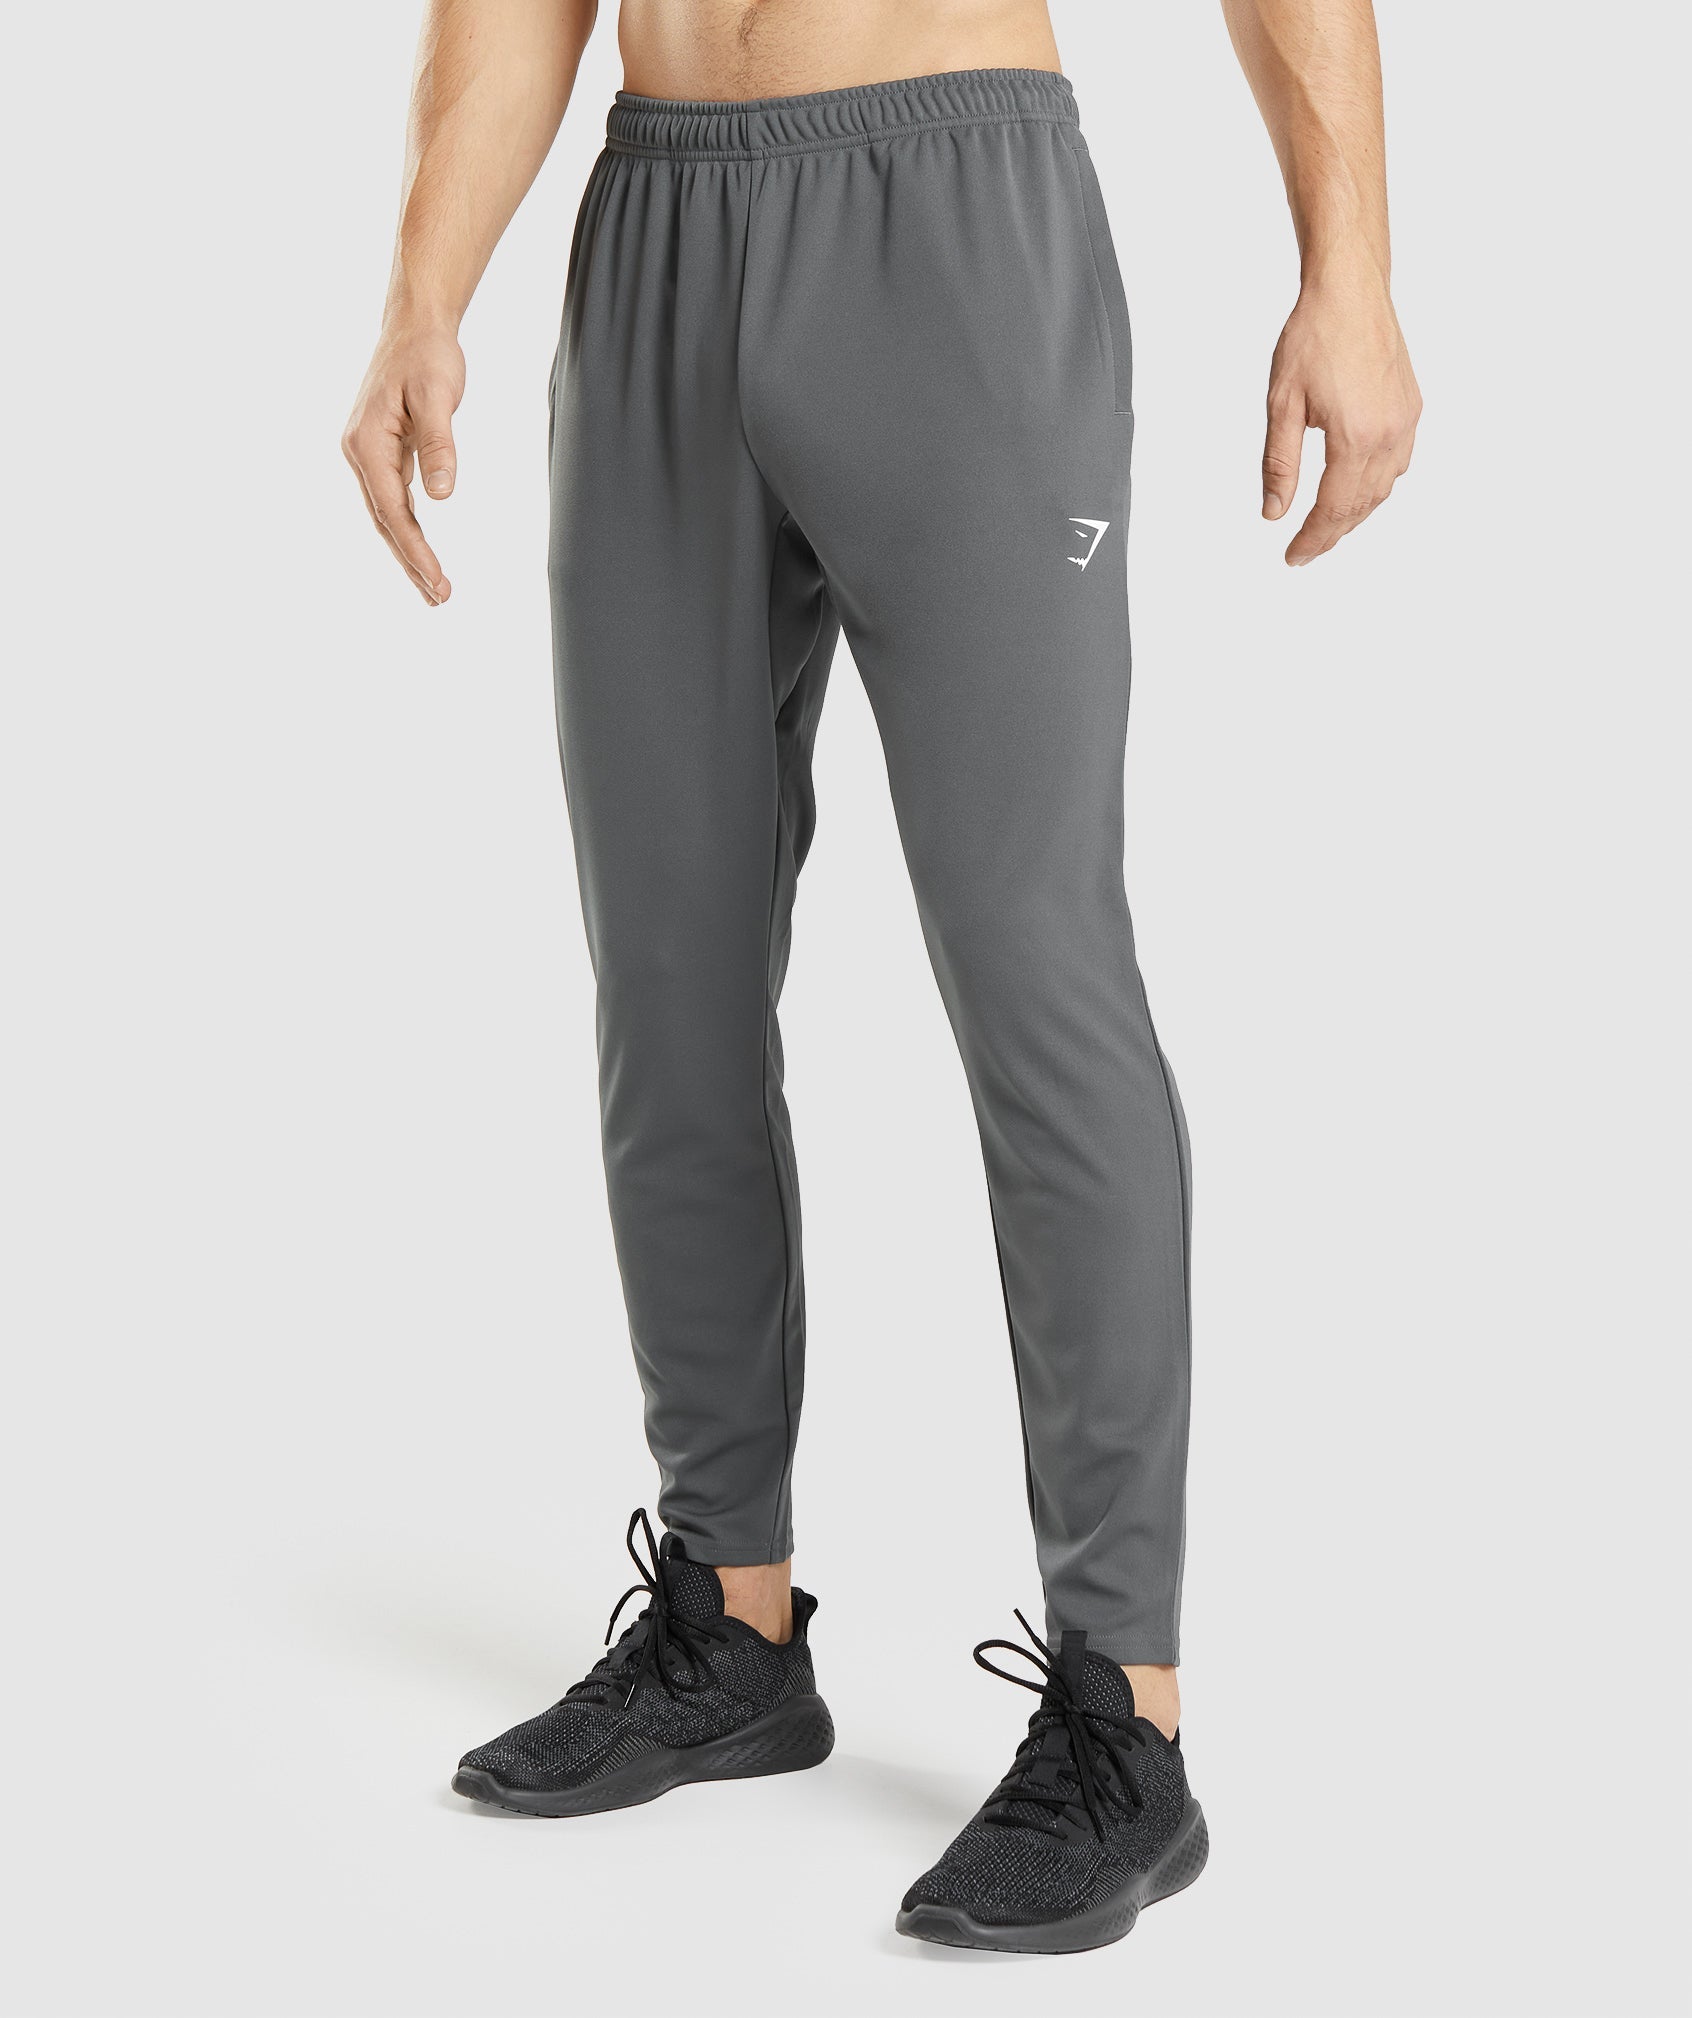 Arrival Knit Joggers in Charcoal Grey - view 1